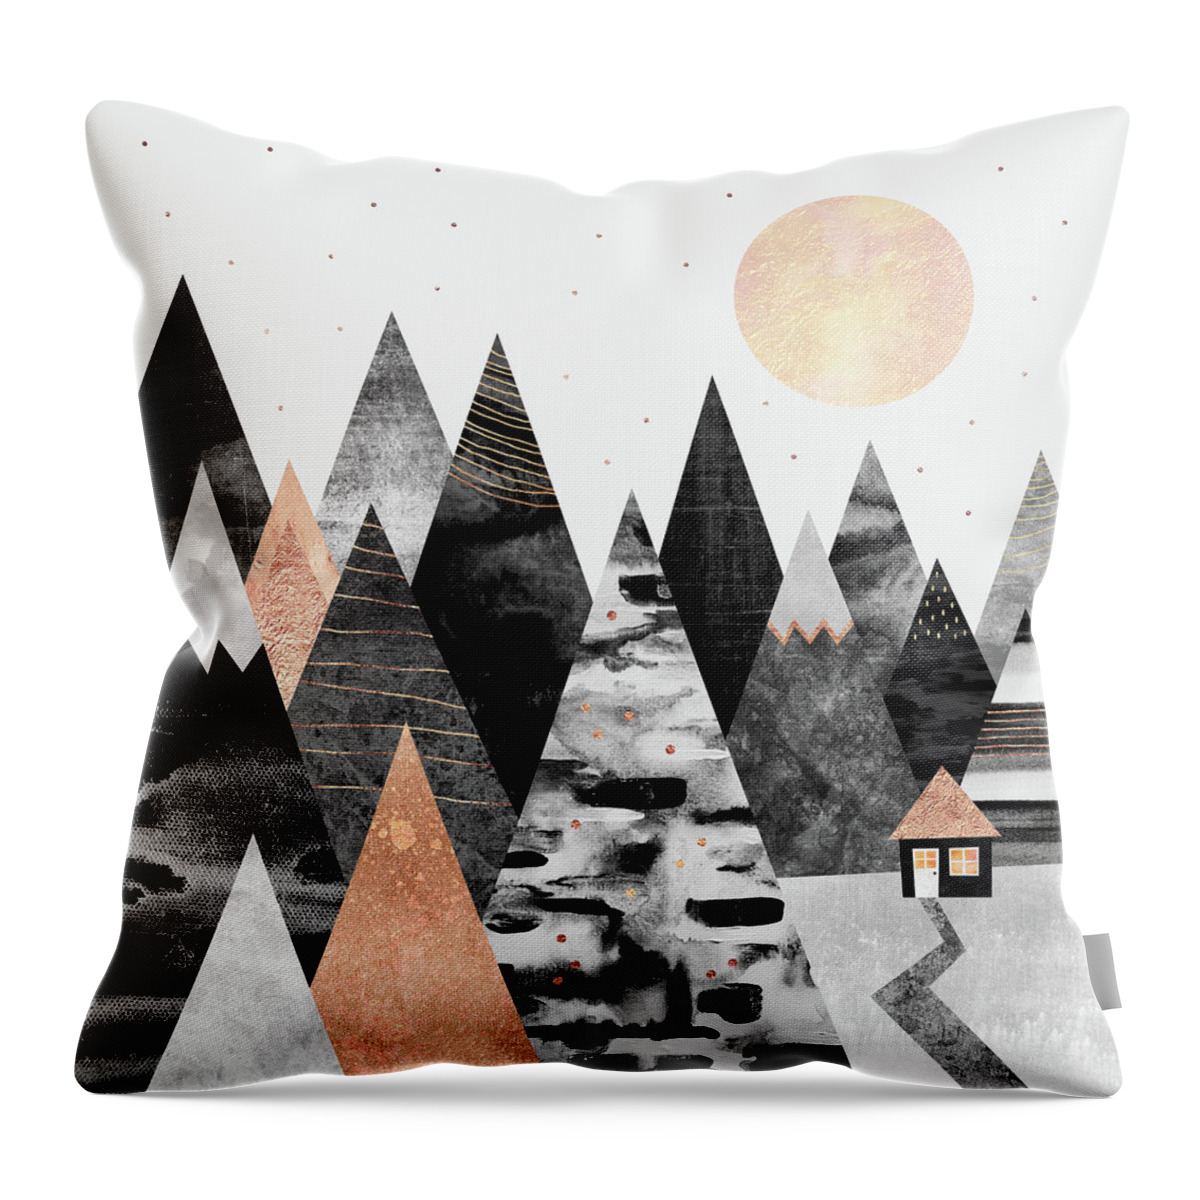 Graphic Throw Pillow featuring the digital art Little Cabin by Elisabeth Fredriksson